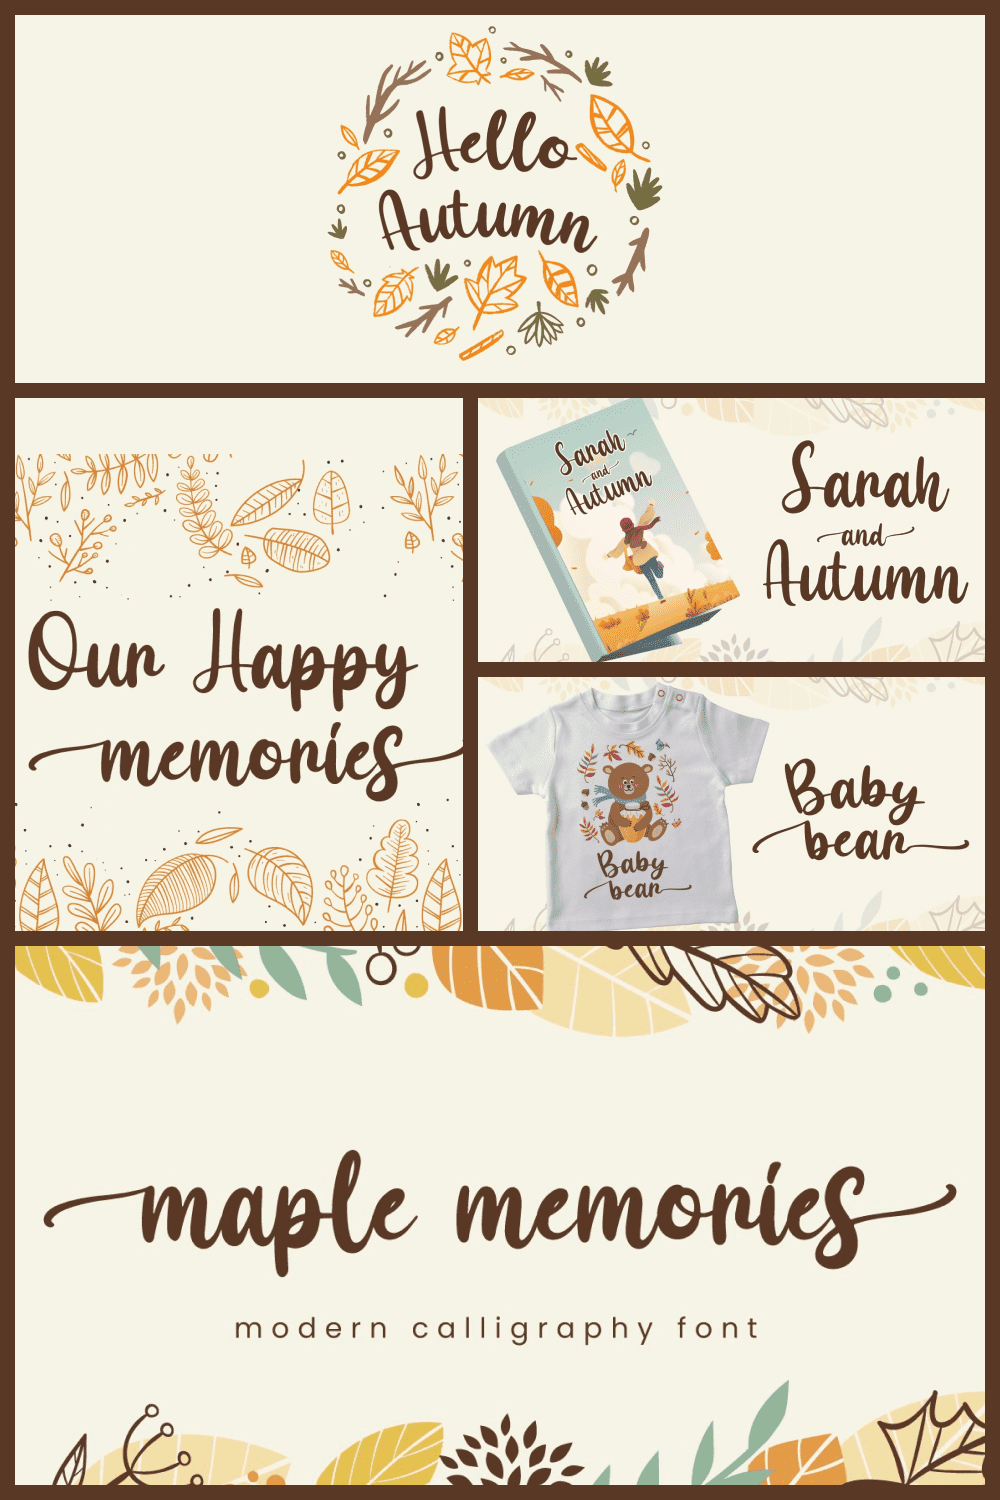 Maple Memories by Attype.